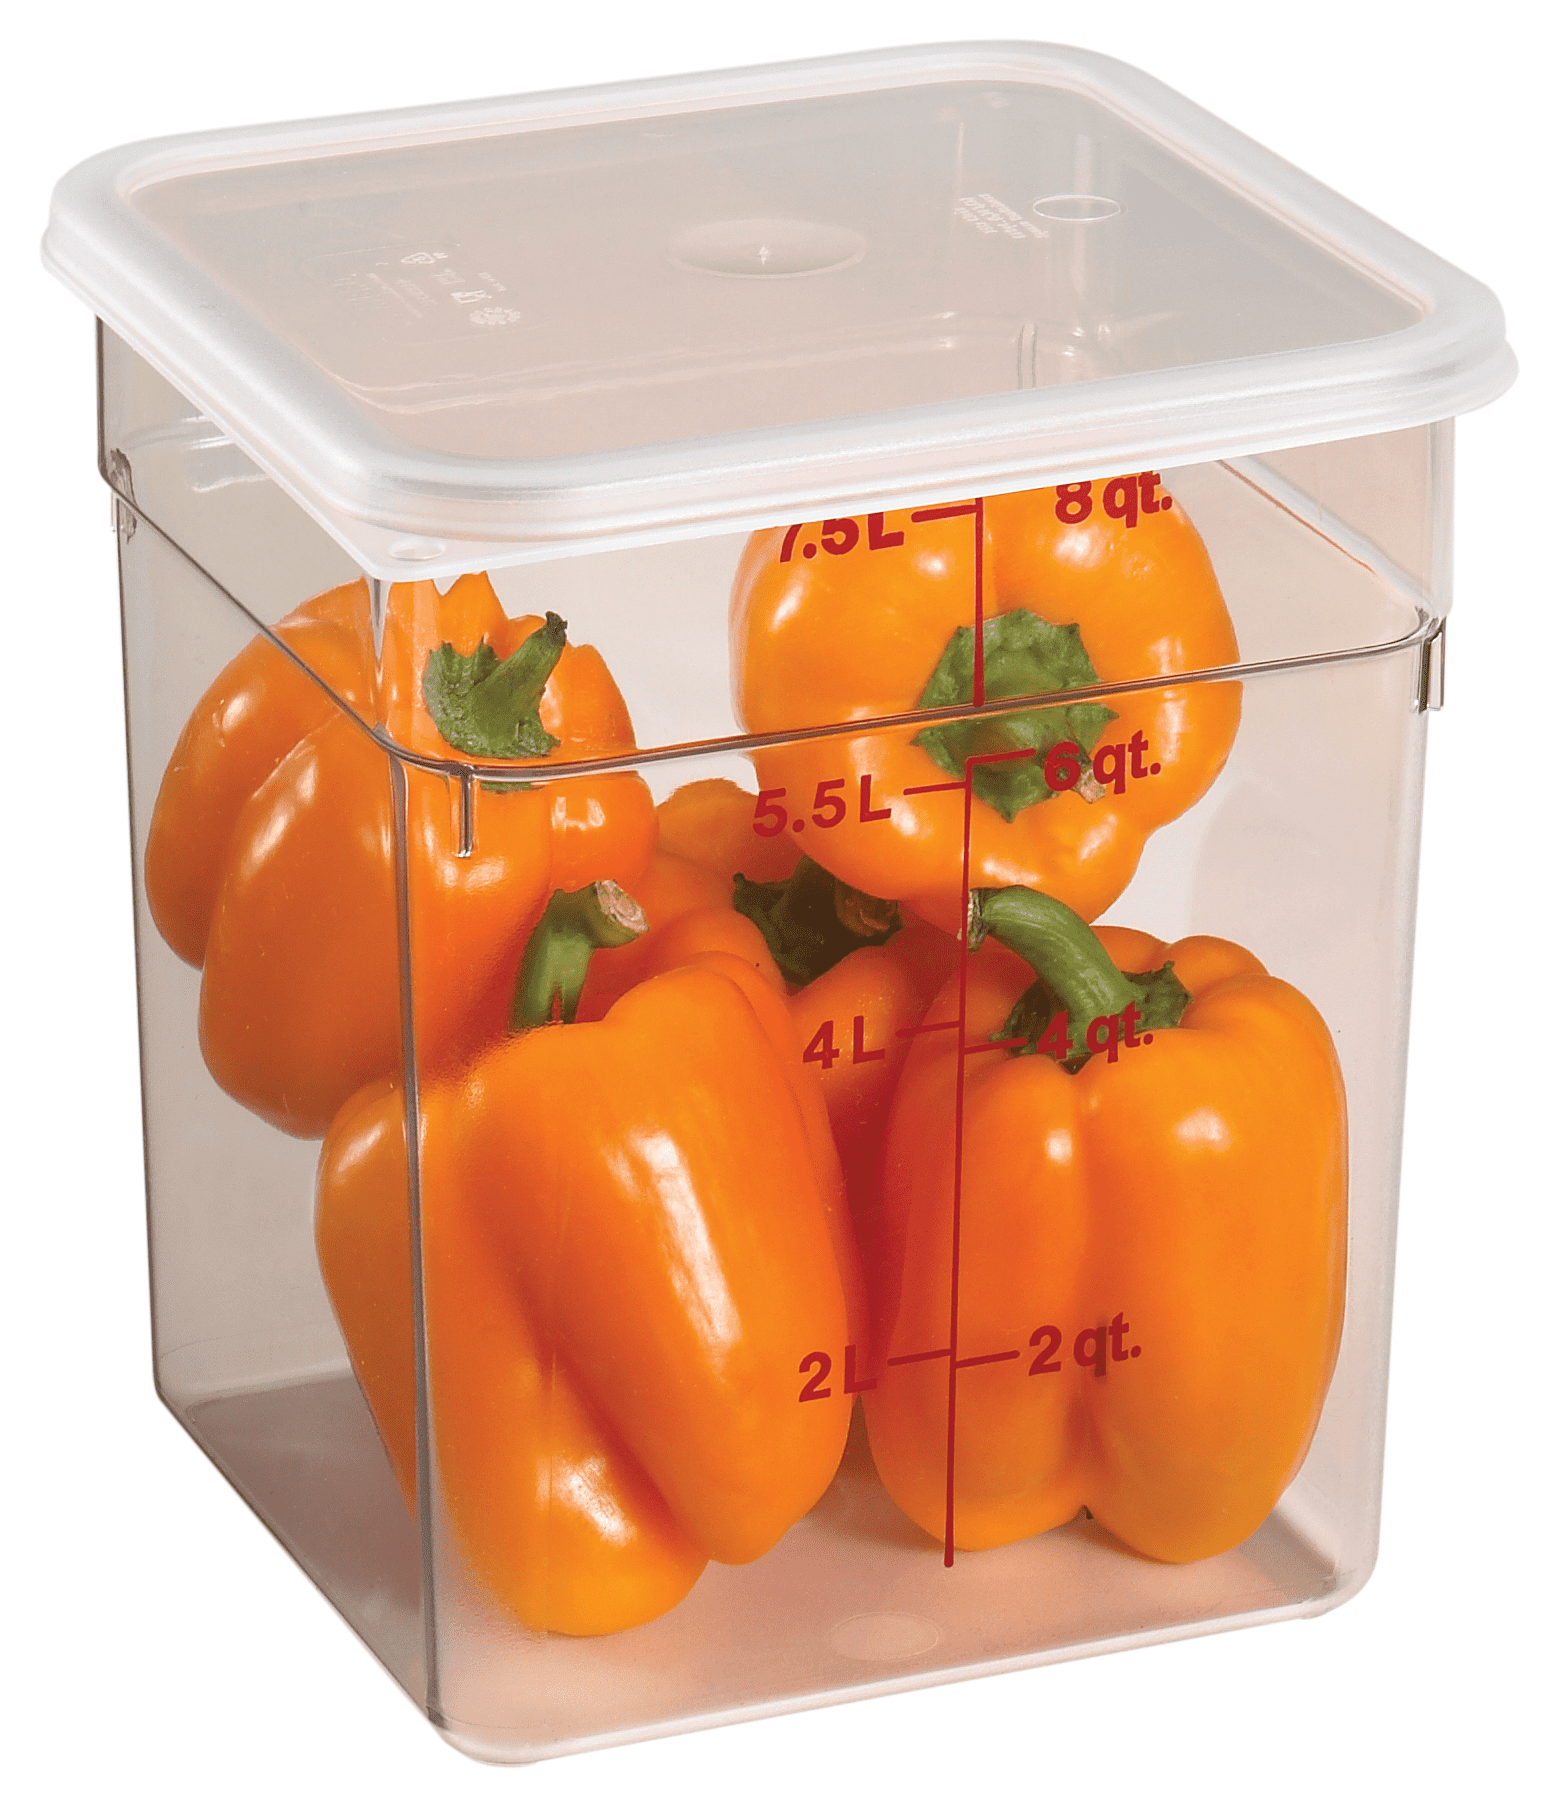 Cambro CamSquares® 8 Qt. Translucent Square Polypropylene Food Storage  Container